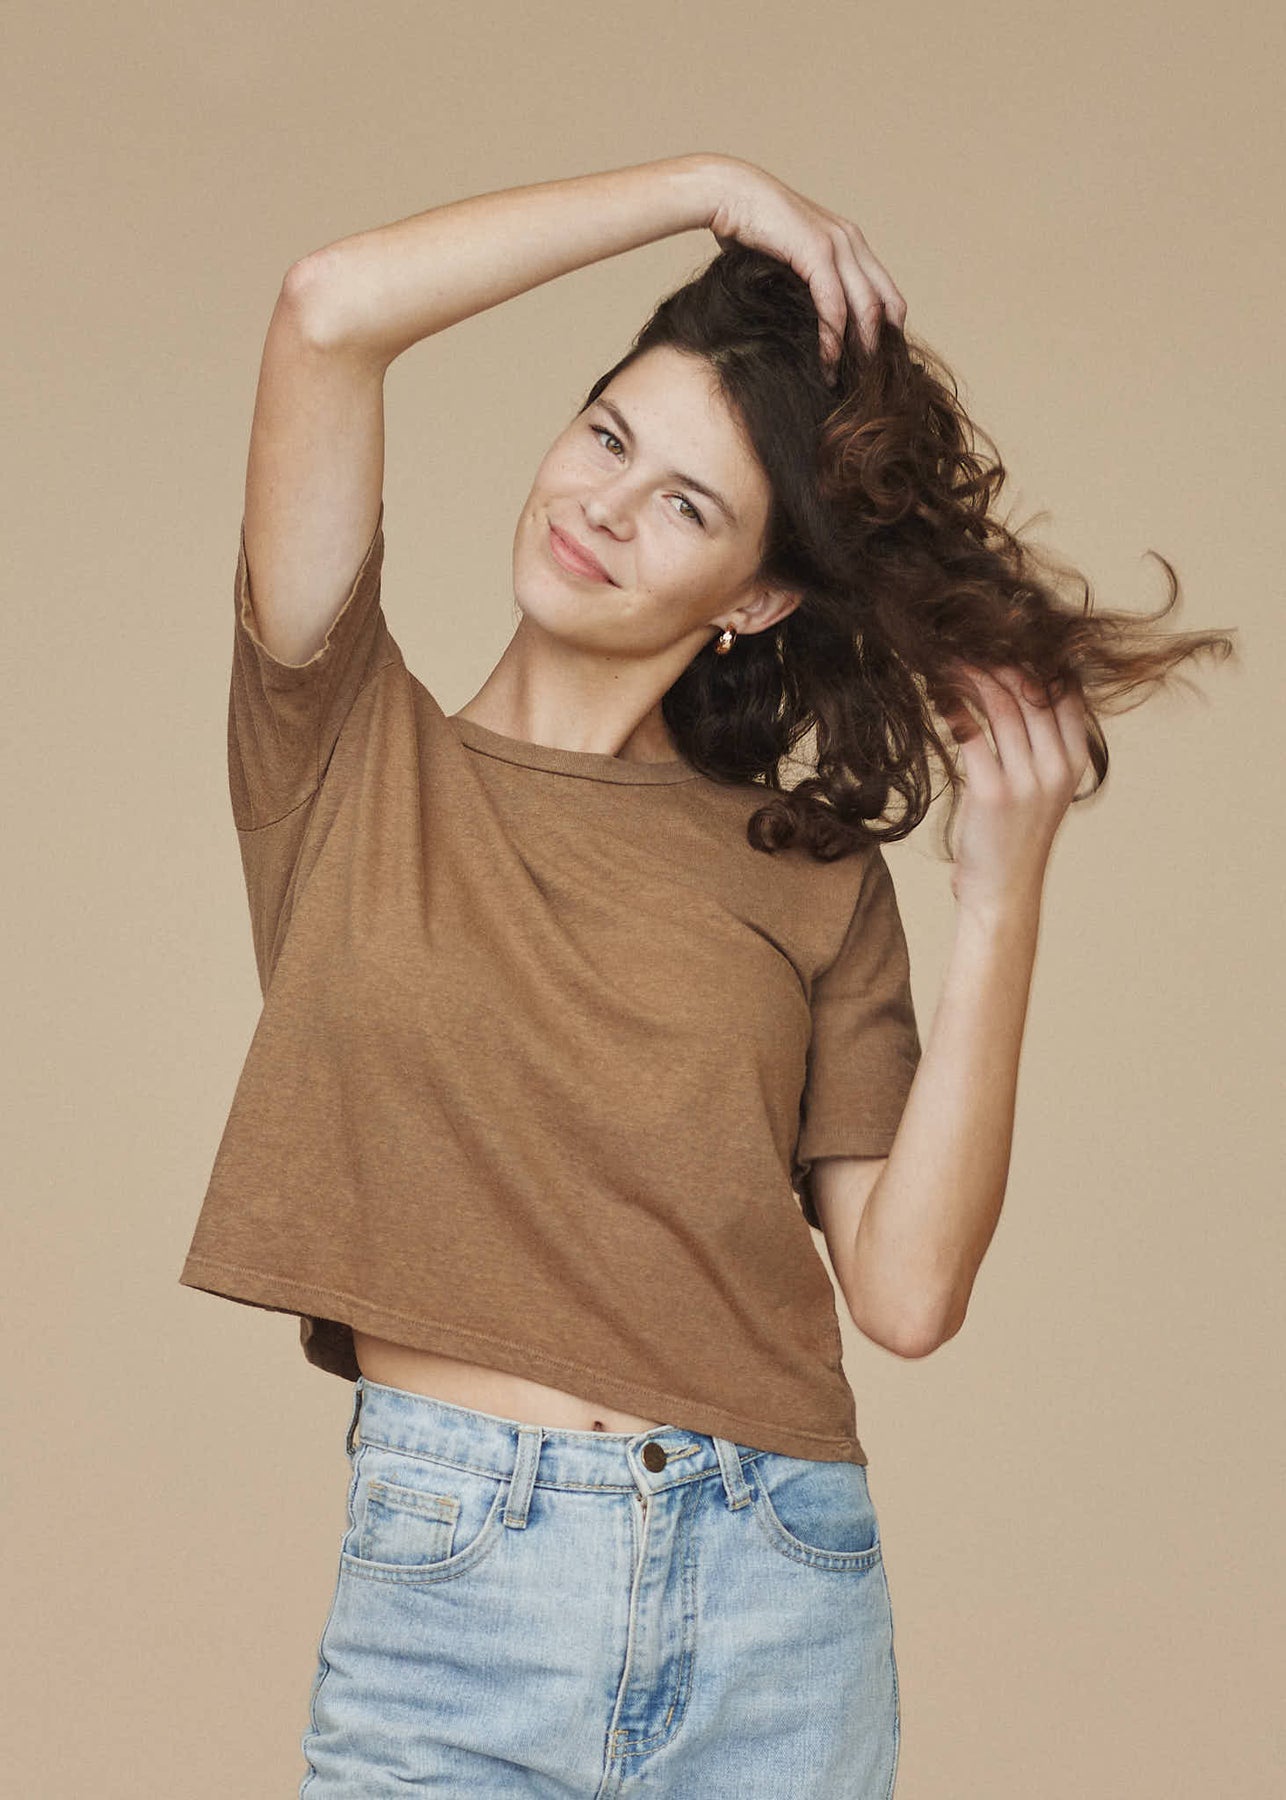 A classic, easy crop top that goes with anything and everything. Loose fitting, super soft hemp and organic cotton, we're sure it'll become a staple in your wardrobe! Sustainably made in Los Angeles.